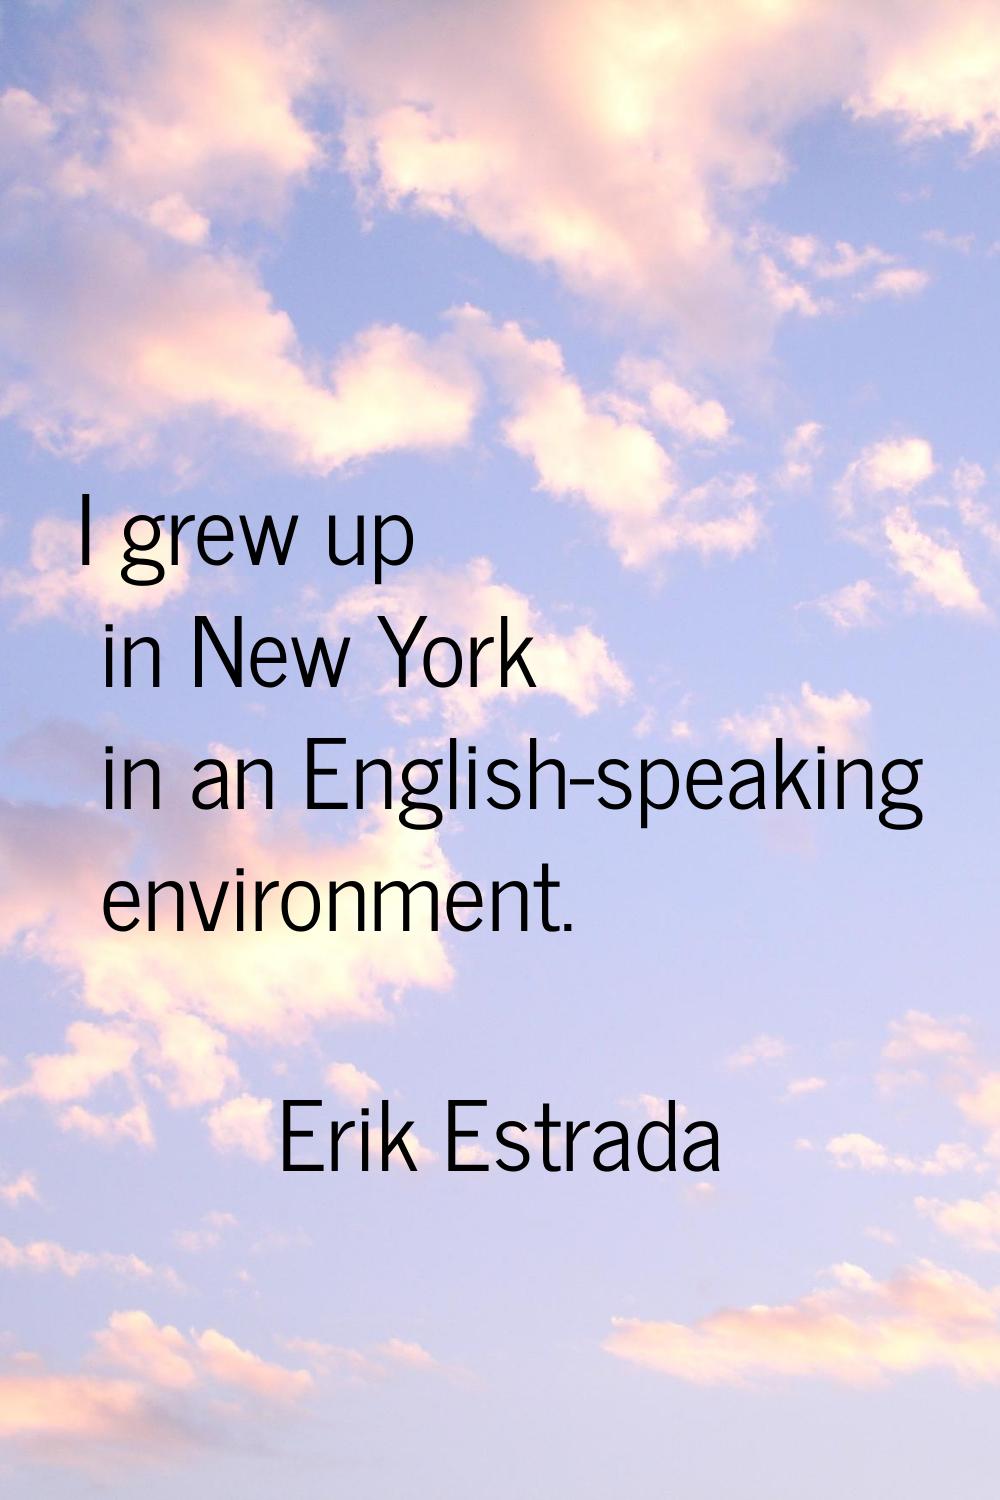 I grew up in New York in an English-speaking environment.